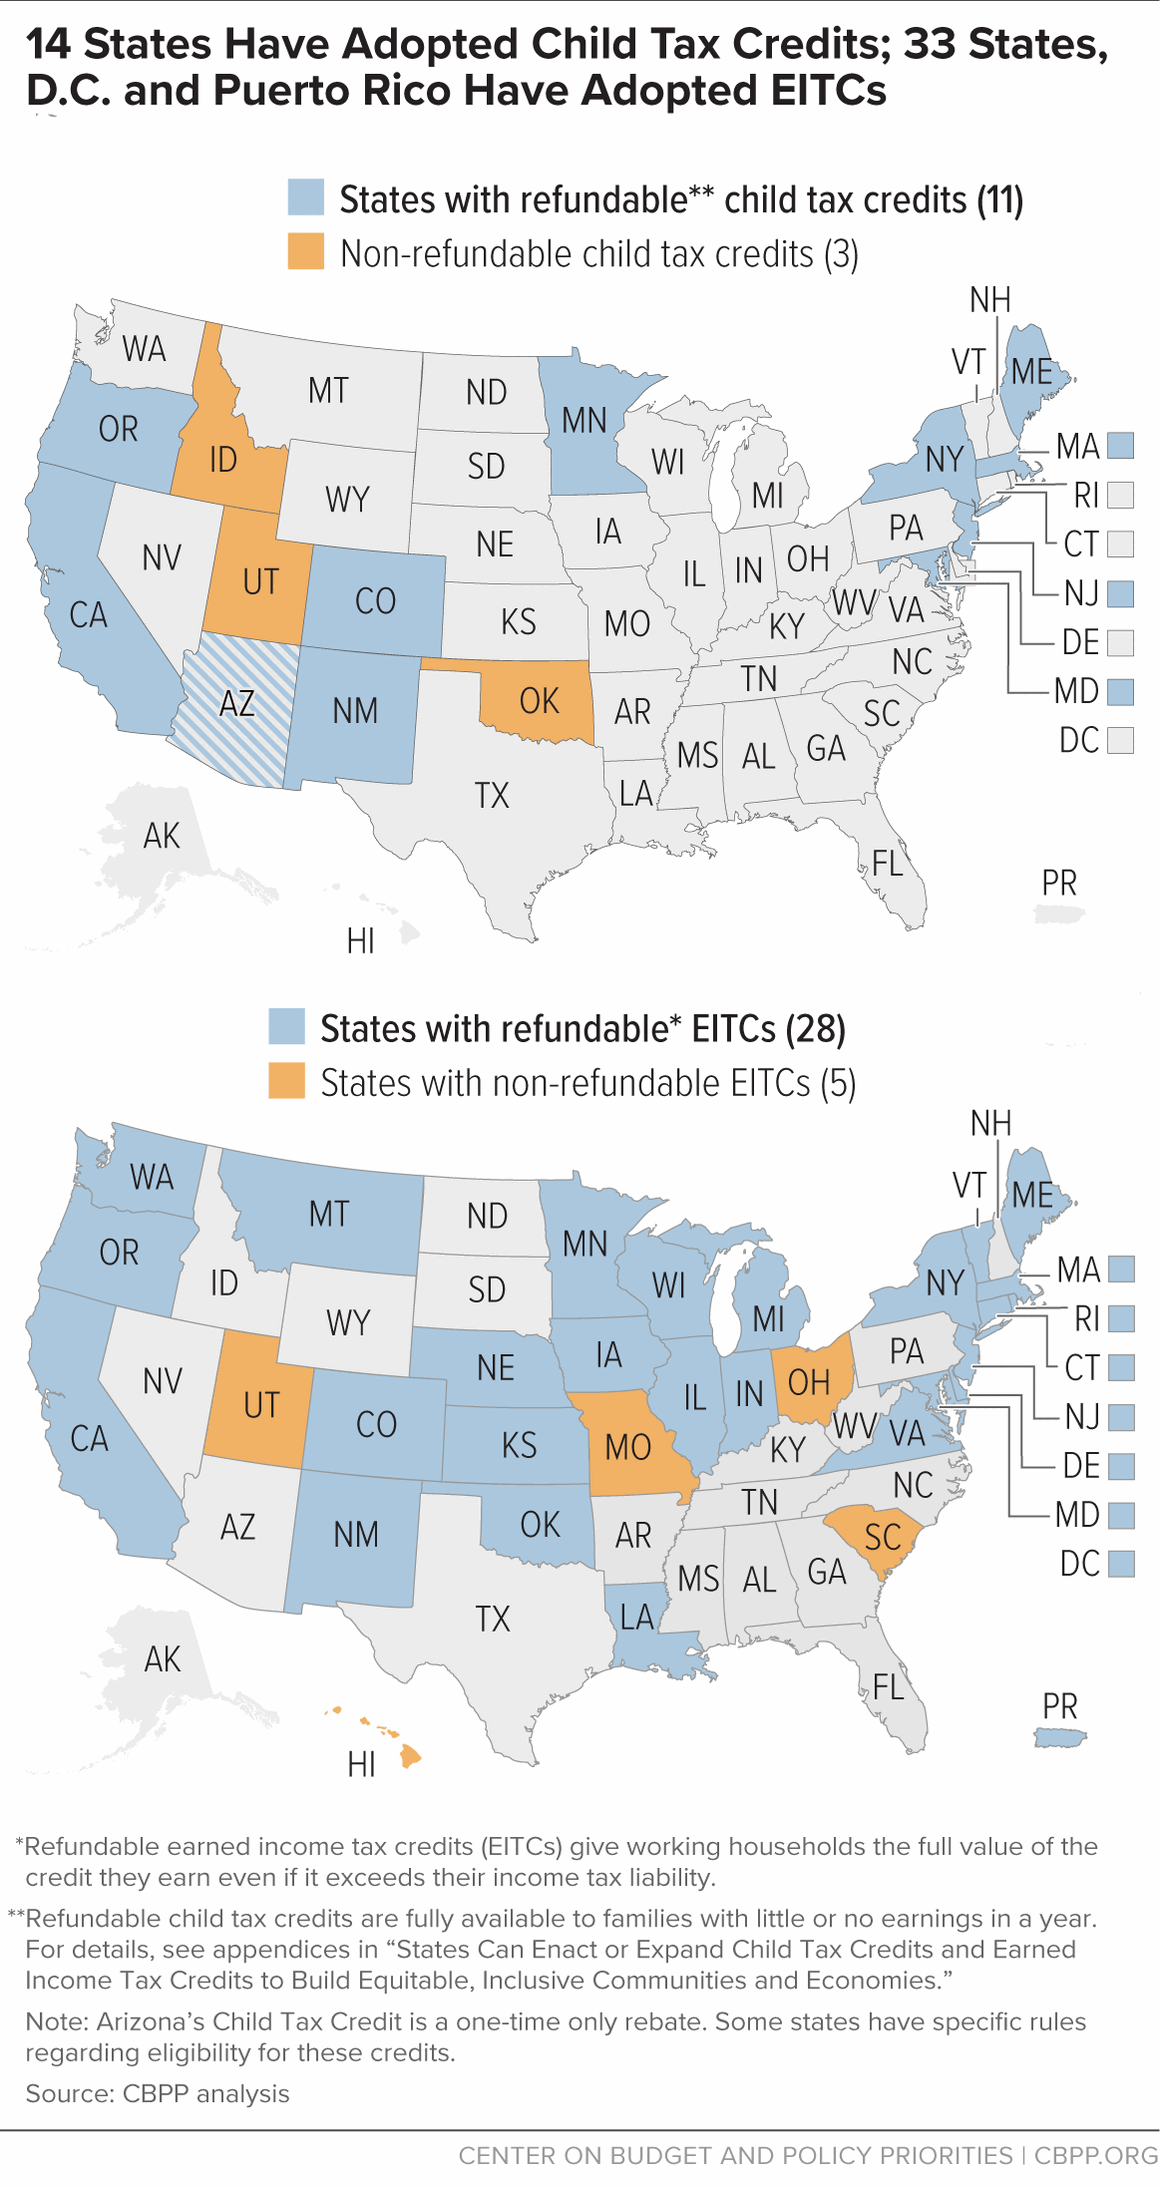 14 States Have Adopted Child Tax Credits; 33 States, D.C. and Puerto Rico Have Adopted EITCs